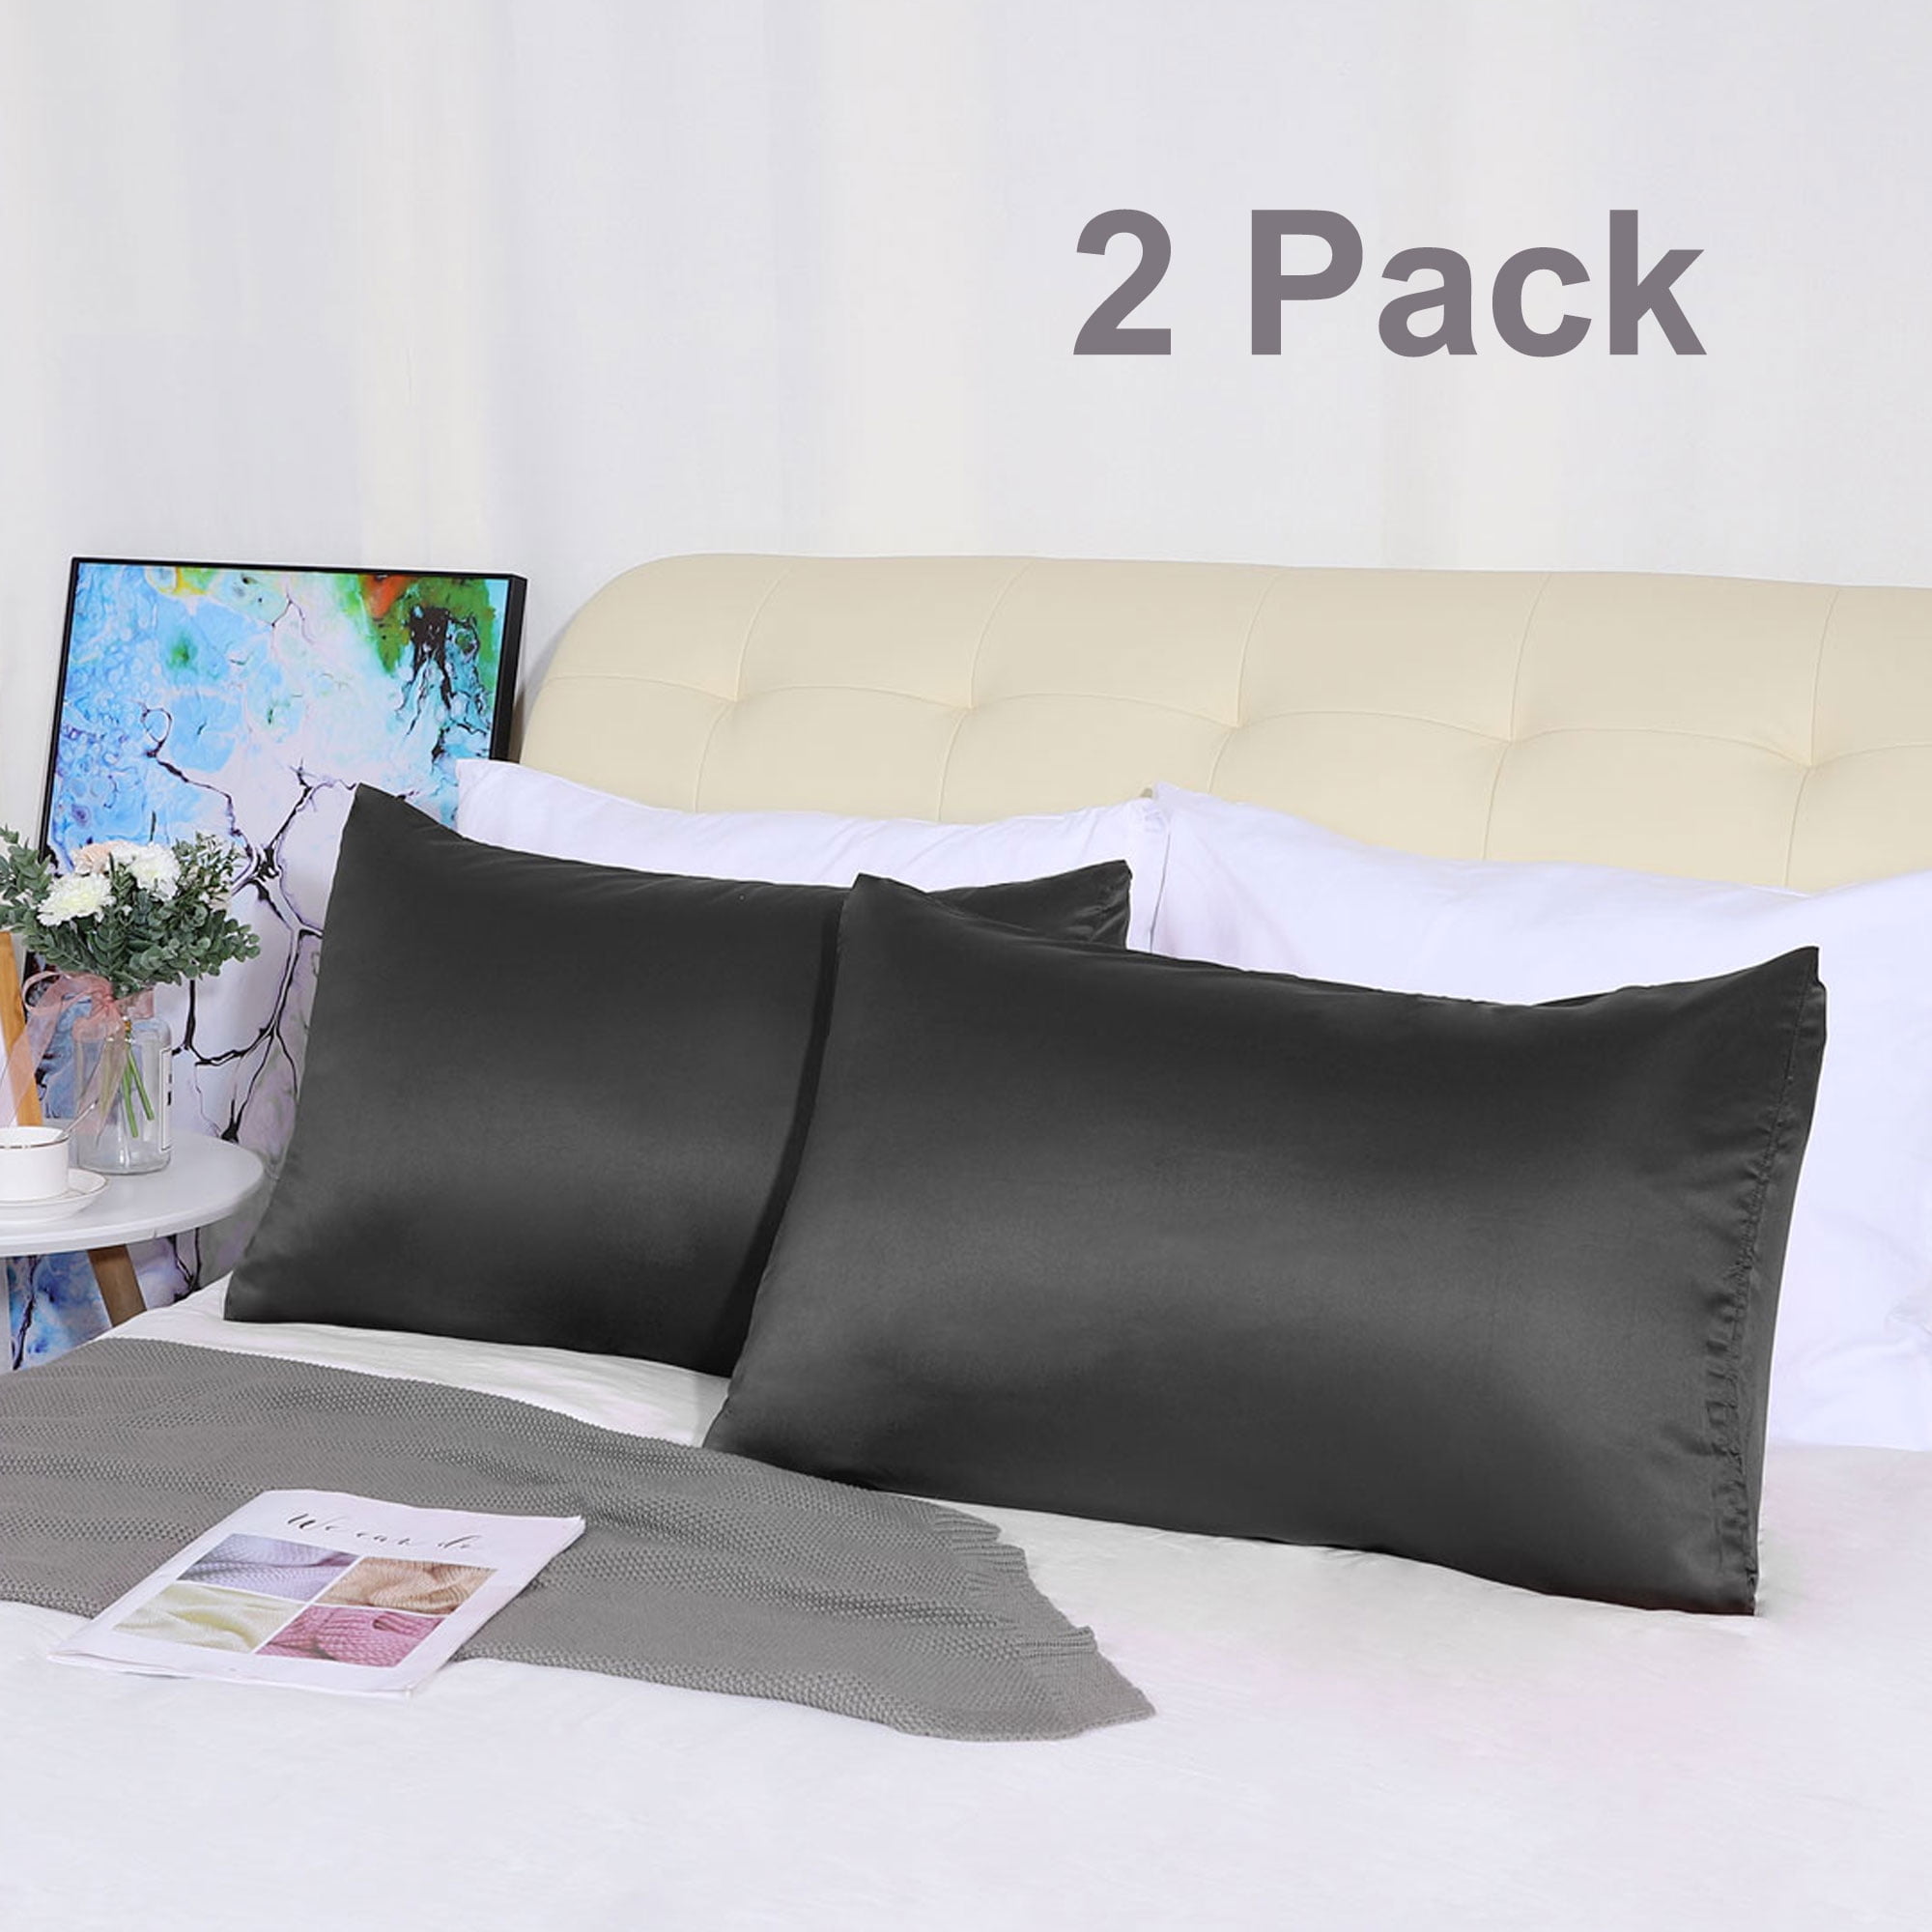 Mac Details about  / Queen Size Pillow Cases Set of 2 Premium Quality Pillowcase Covers Soft